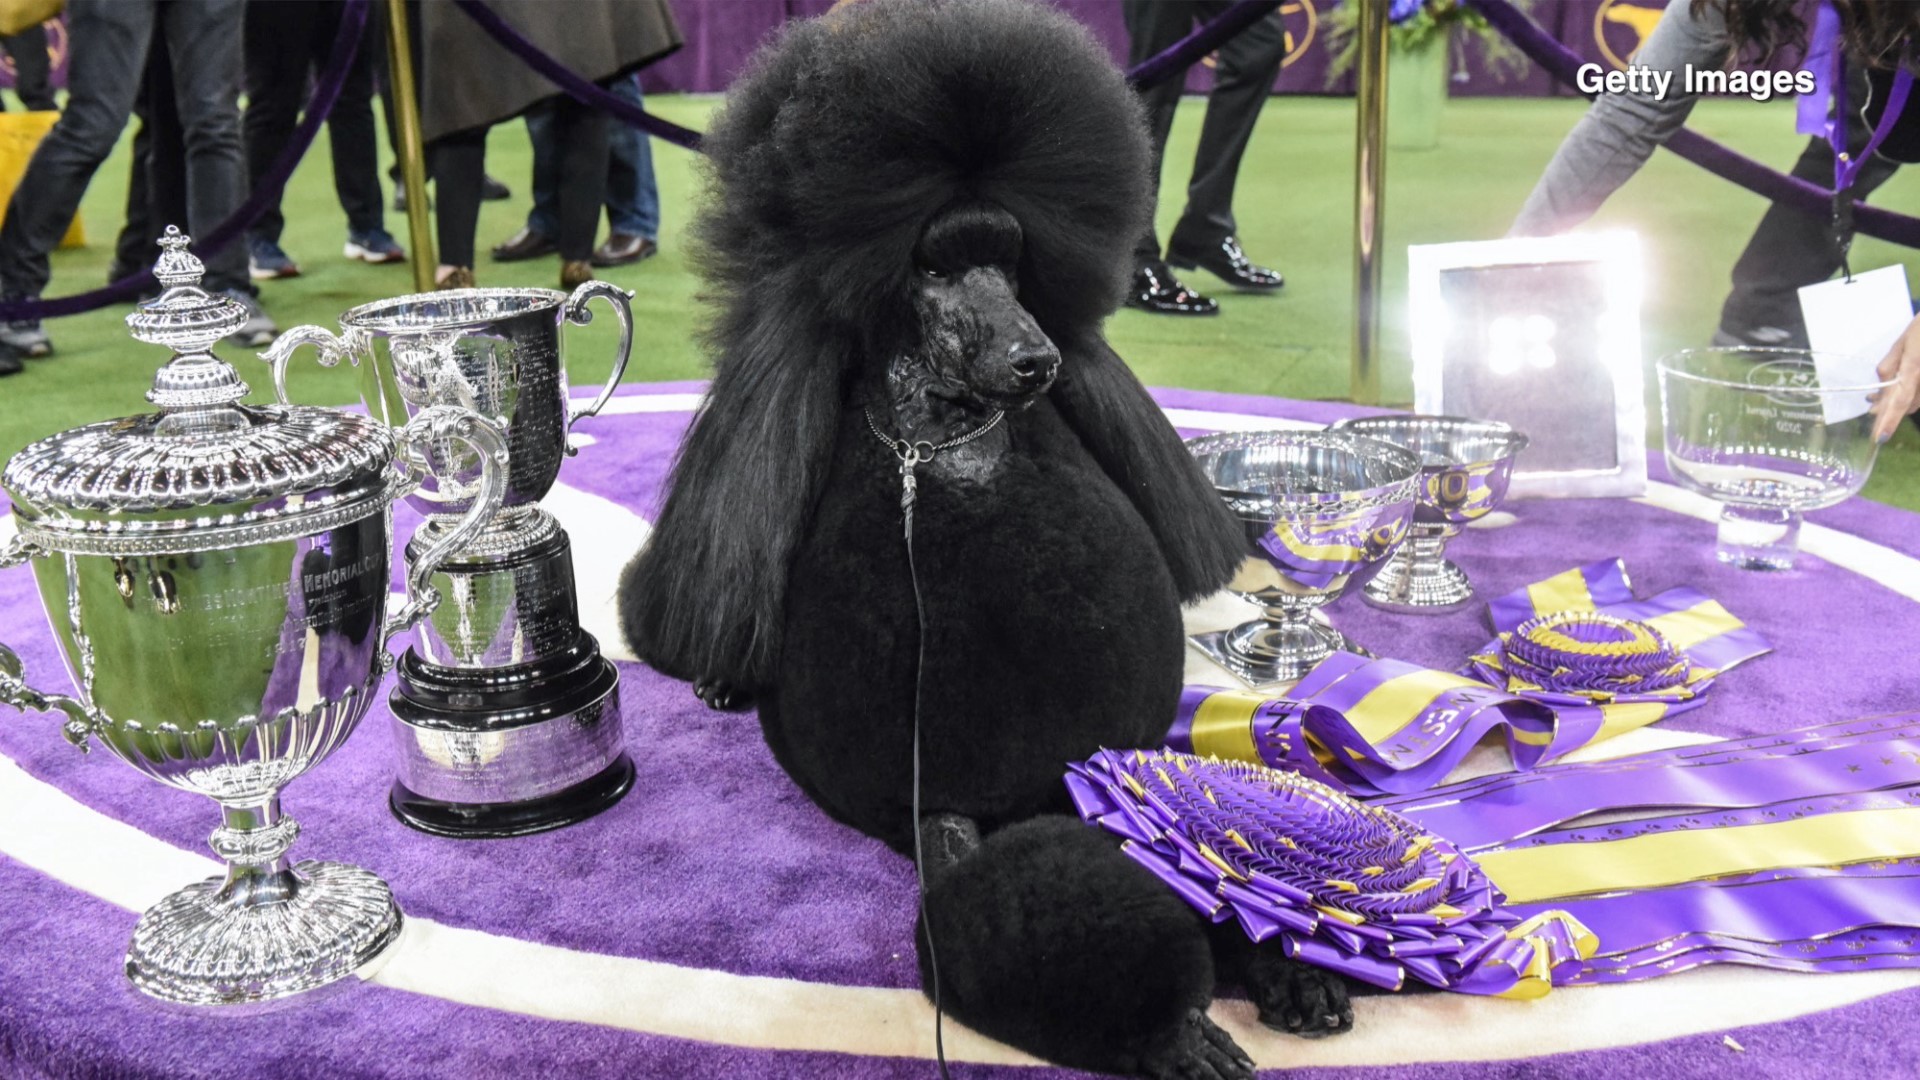 Westminster dog show returning to New York City in 2022